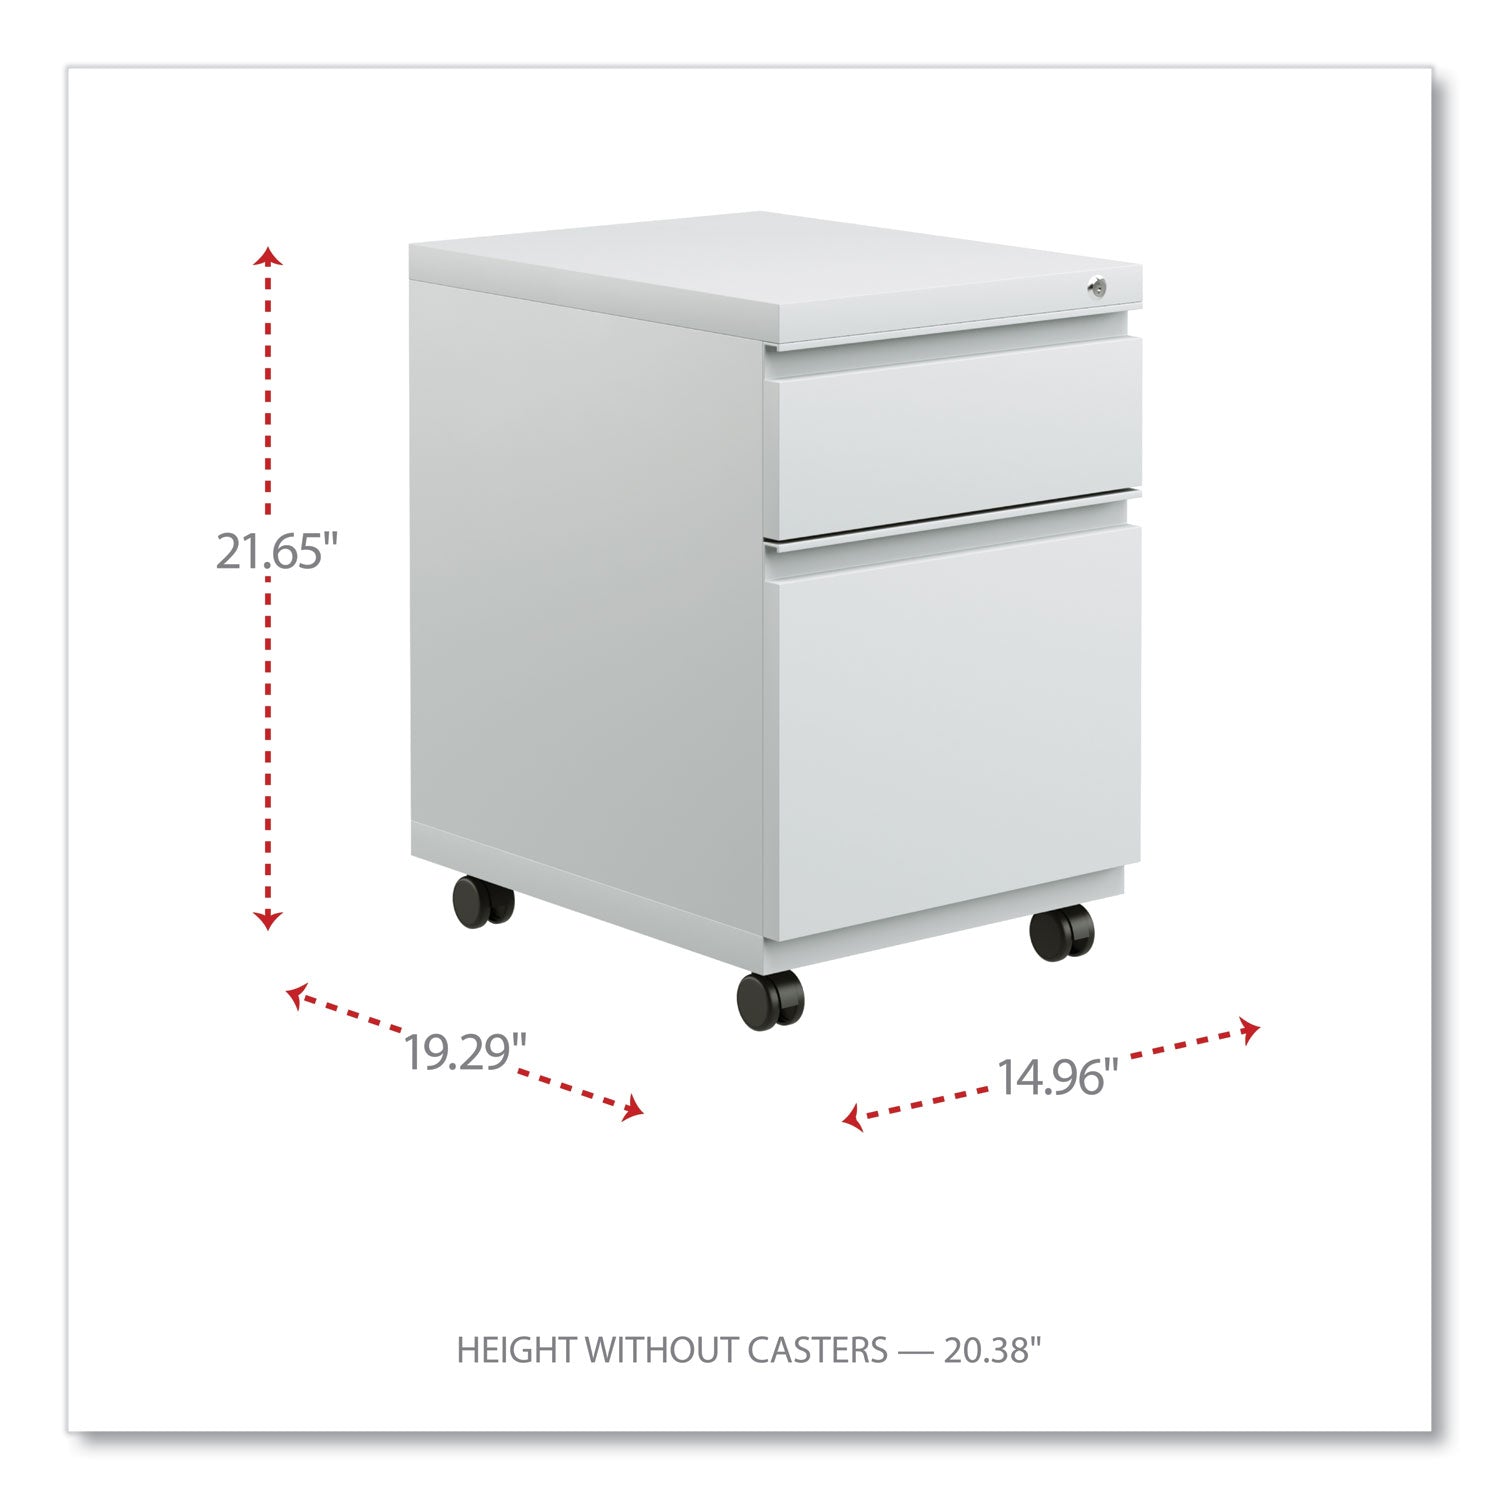 file-pedestal-with-full-length-pull-left-or-right-2-drawers-box-file-legal-letter-light-gray-1496-x-1929-x-2165_alepbbflg - 2